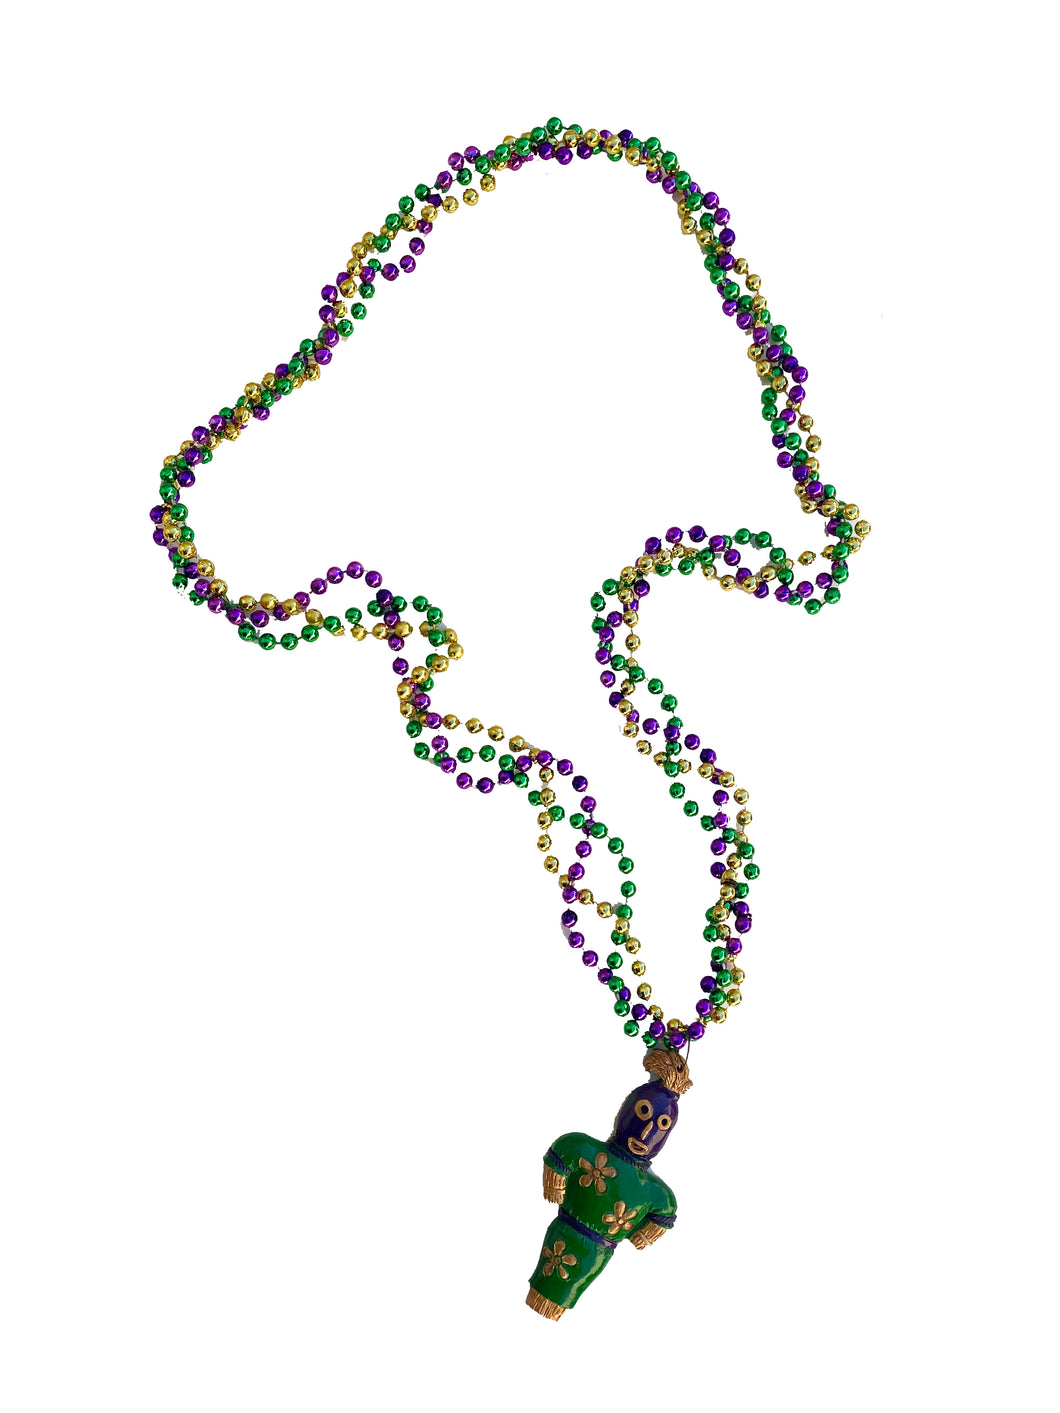 Voodoo Doll Medallion on Braided Purple, Green, and Gold Specialty Bead